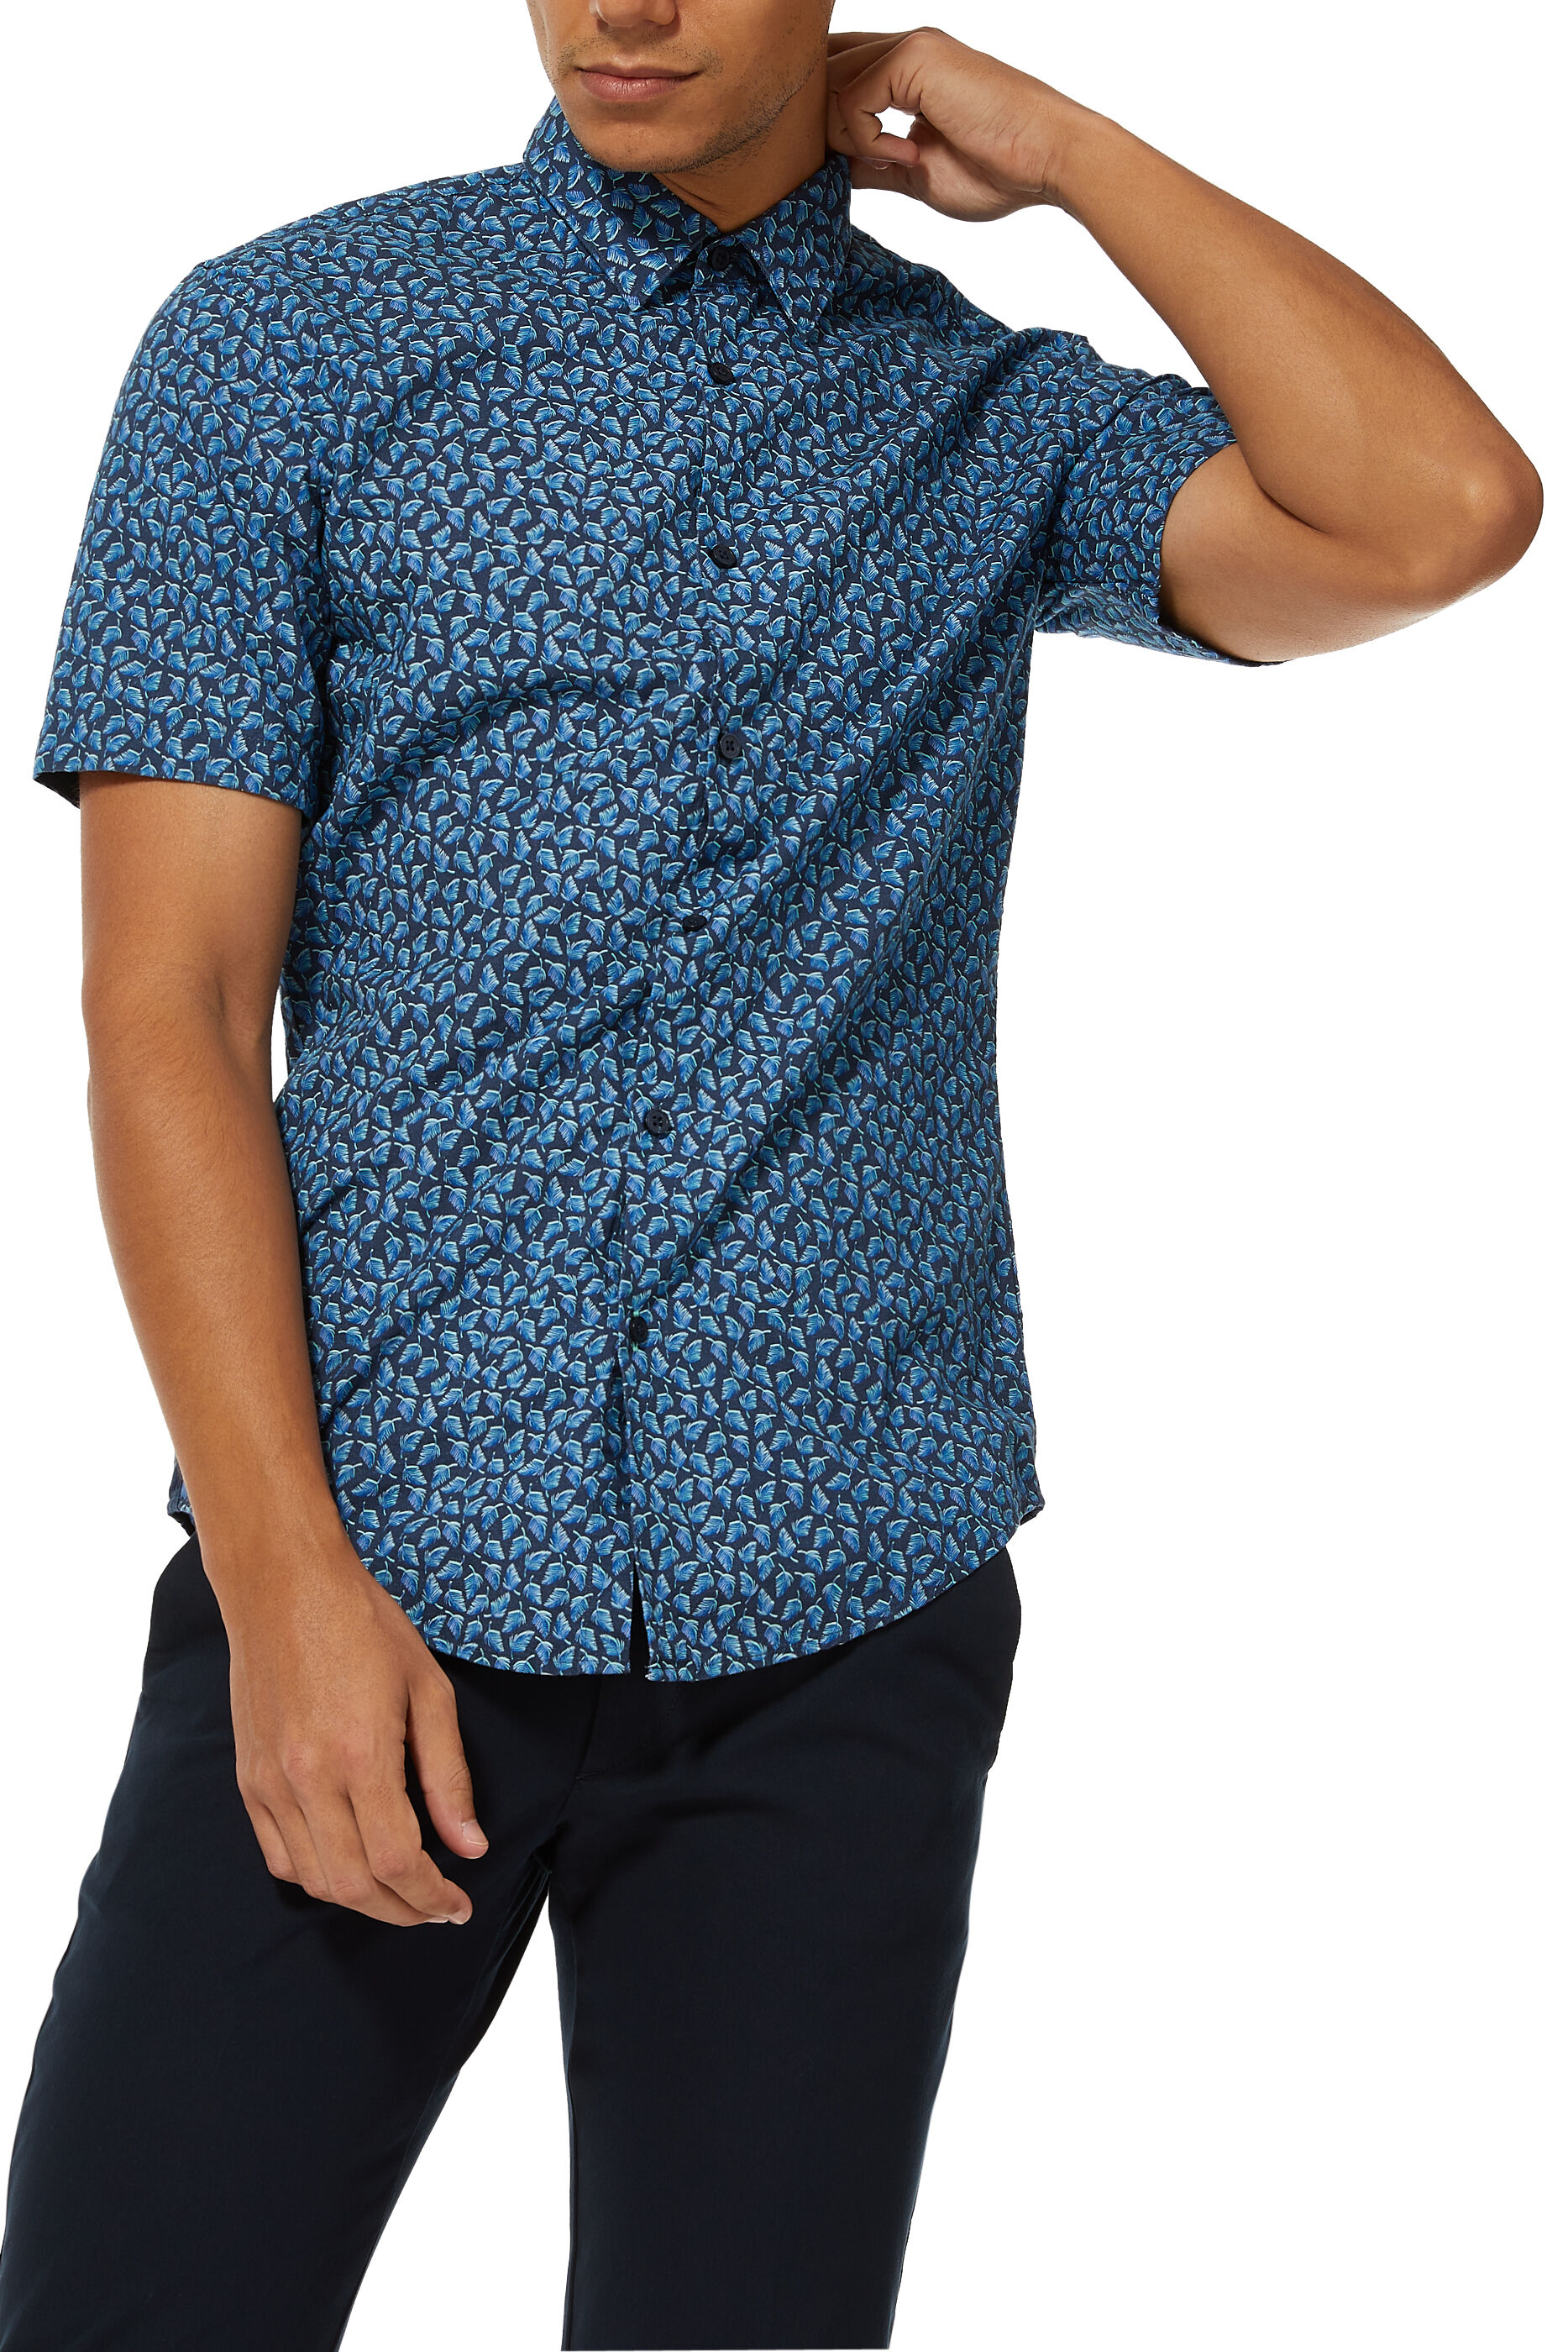 casual shirts for men low price,lsqa.com.uy